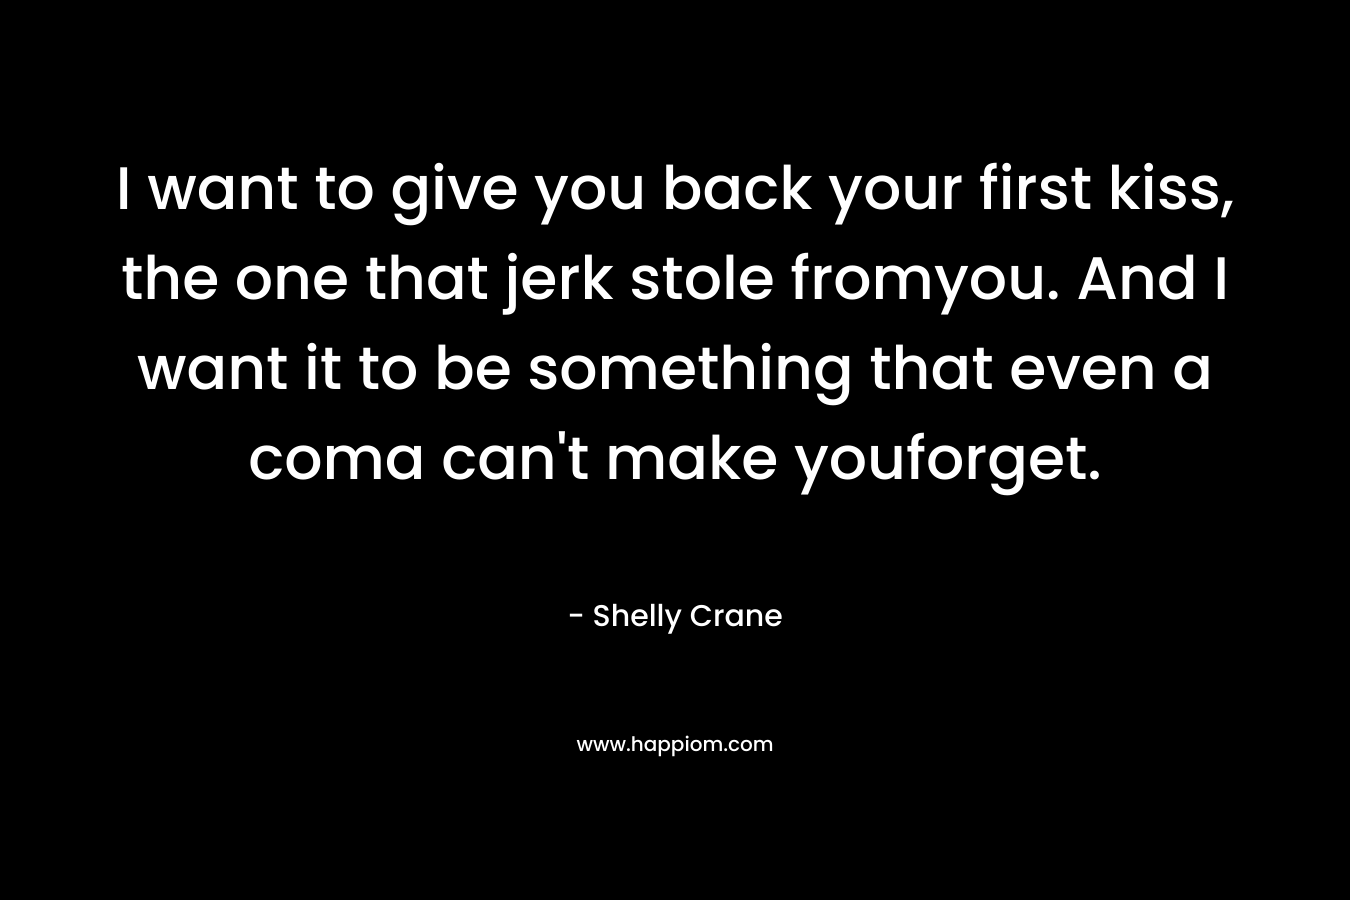 I want to give you back your first kiss, the one that jerk stole fromyou. And I want it to be something that even a coma can’t make youforget. – Shelly Crane